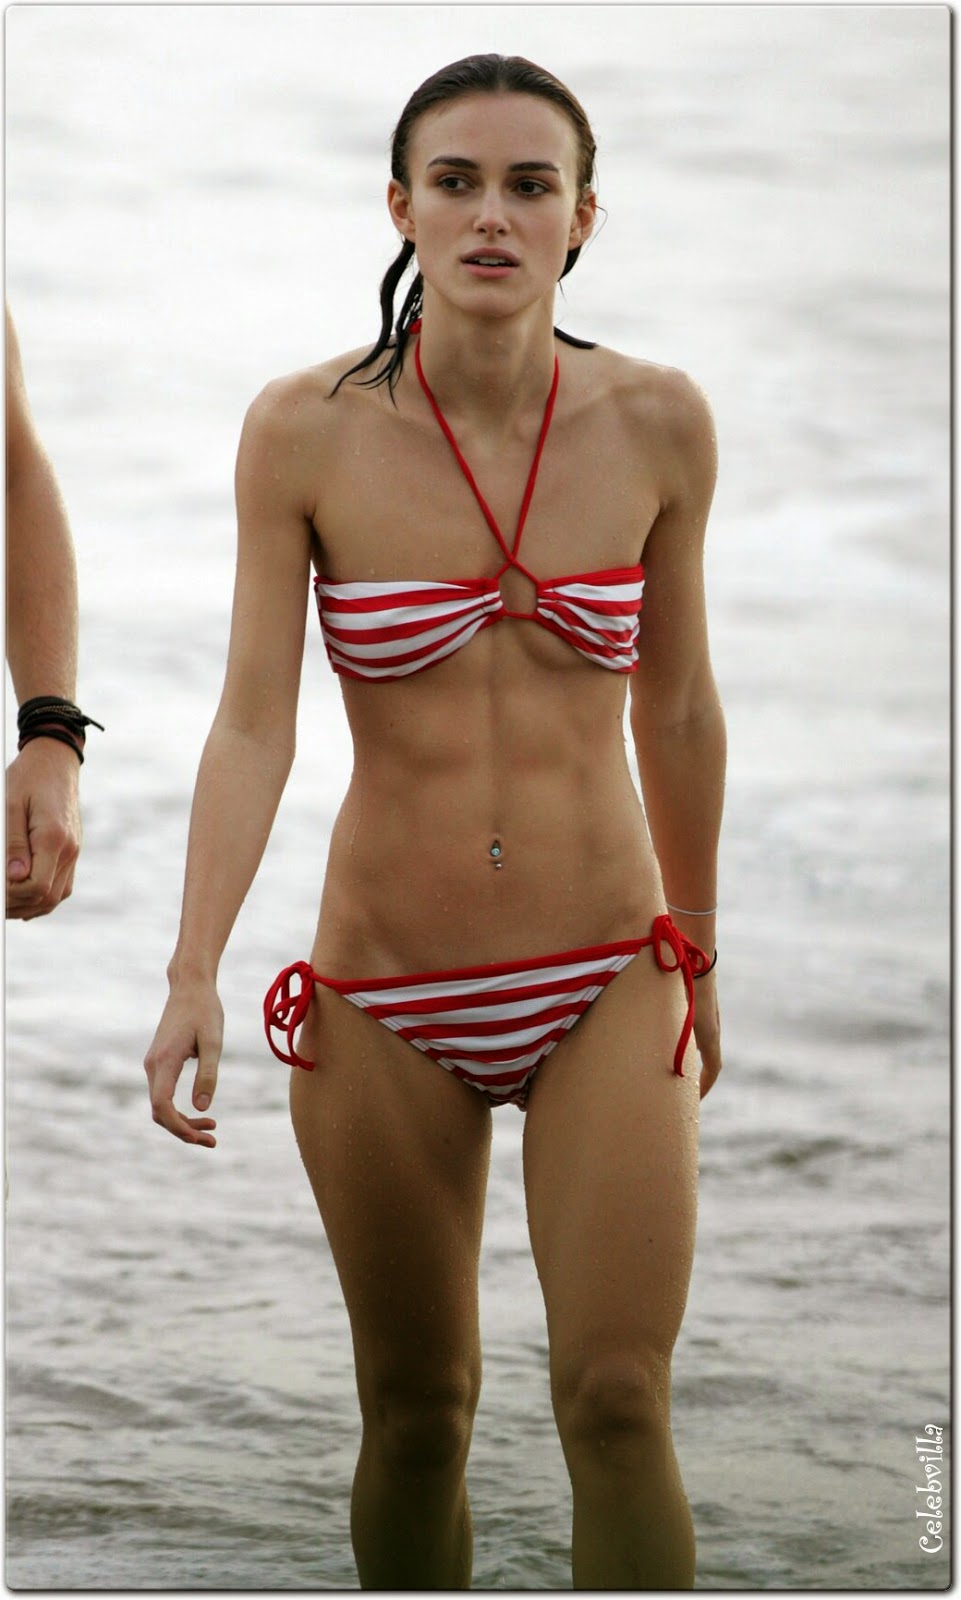 Actress In Bikini Keira Knightley Hot Photos Without